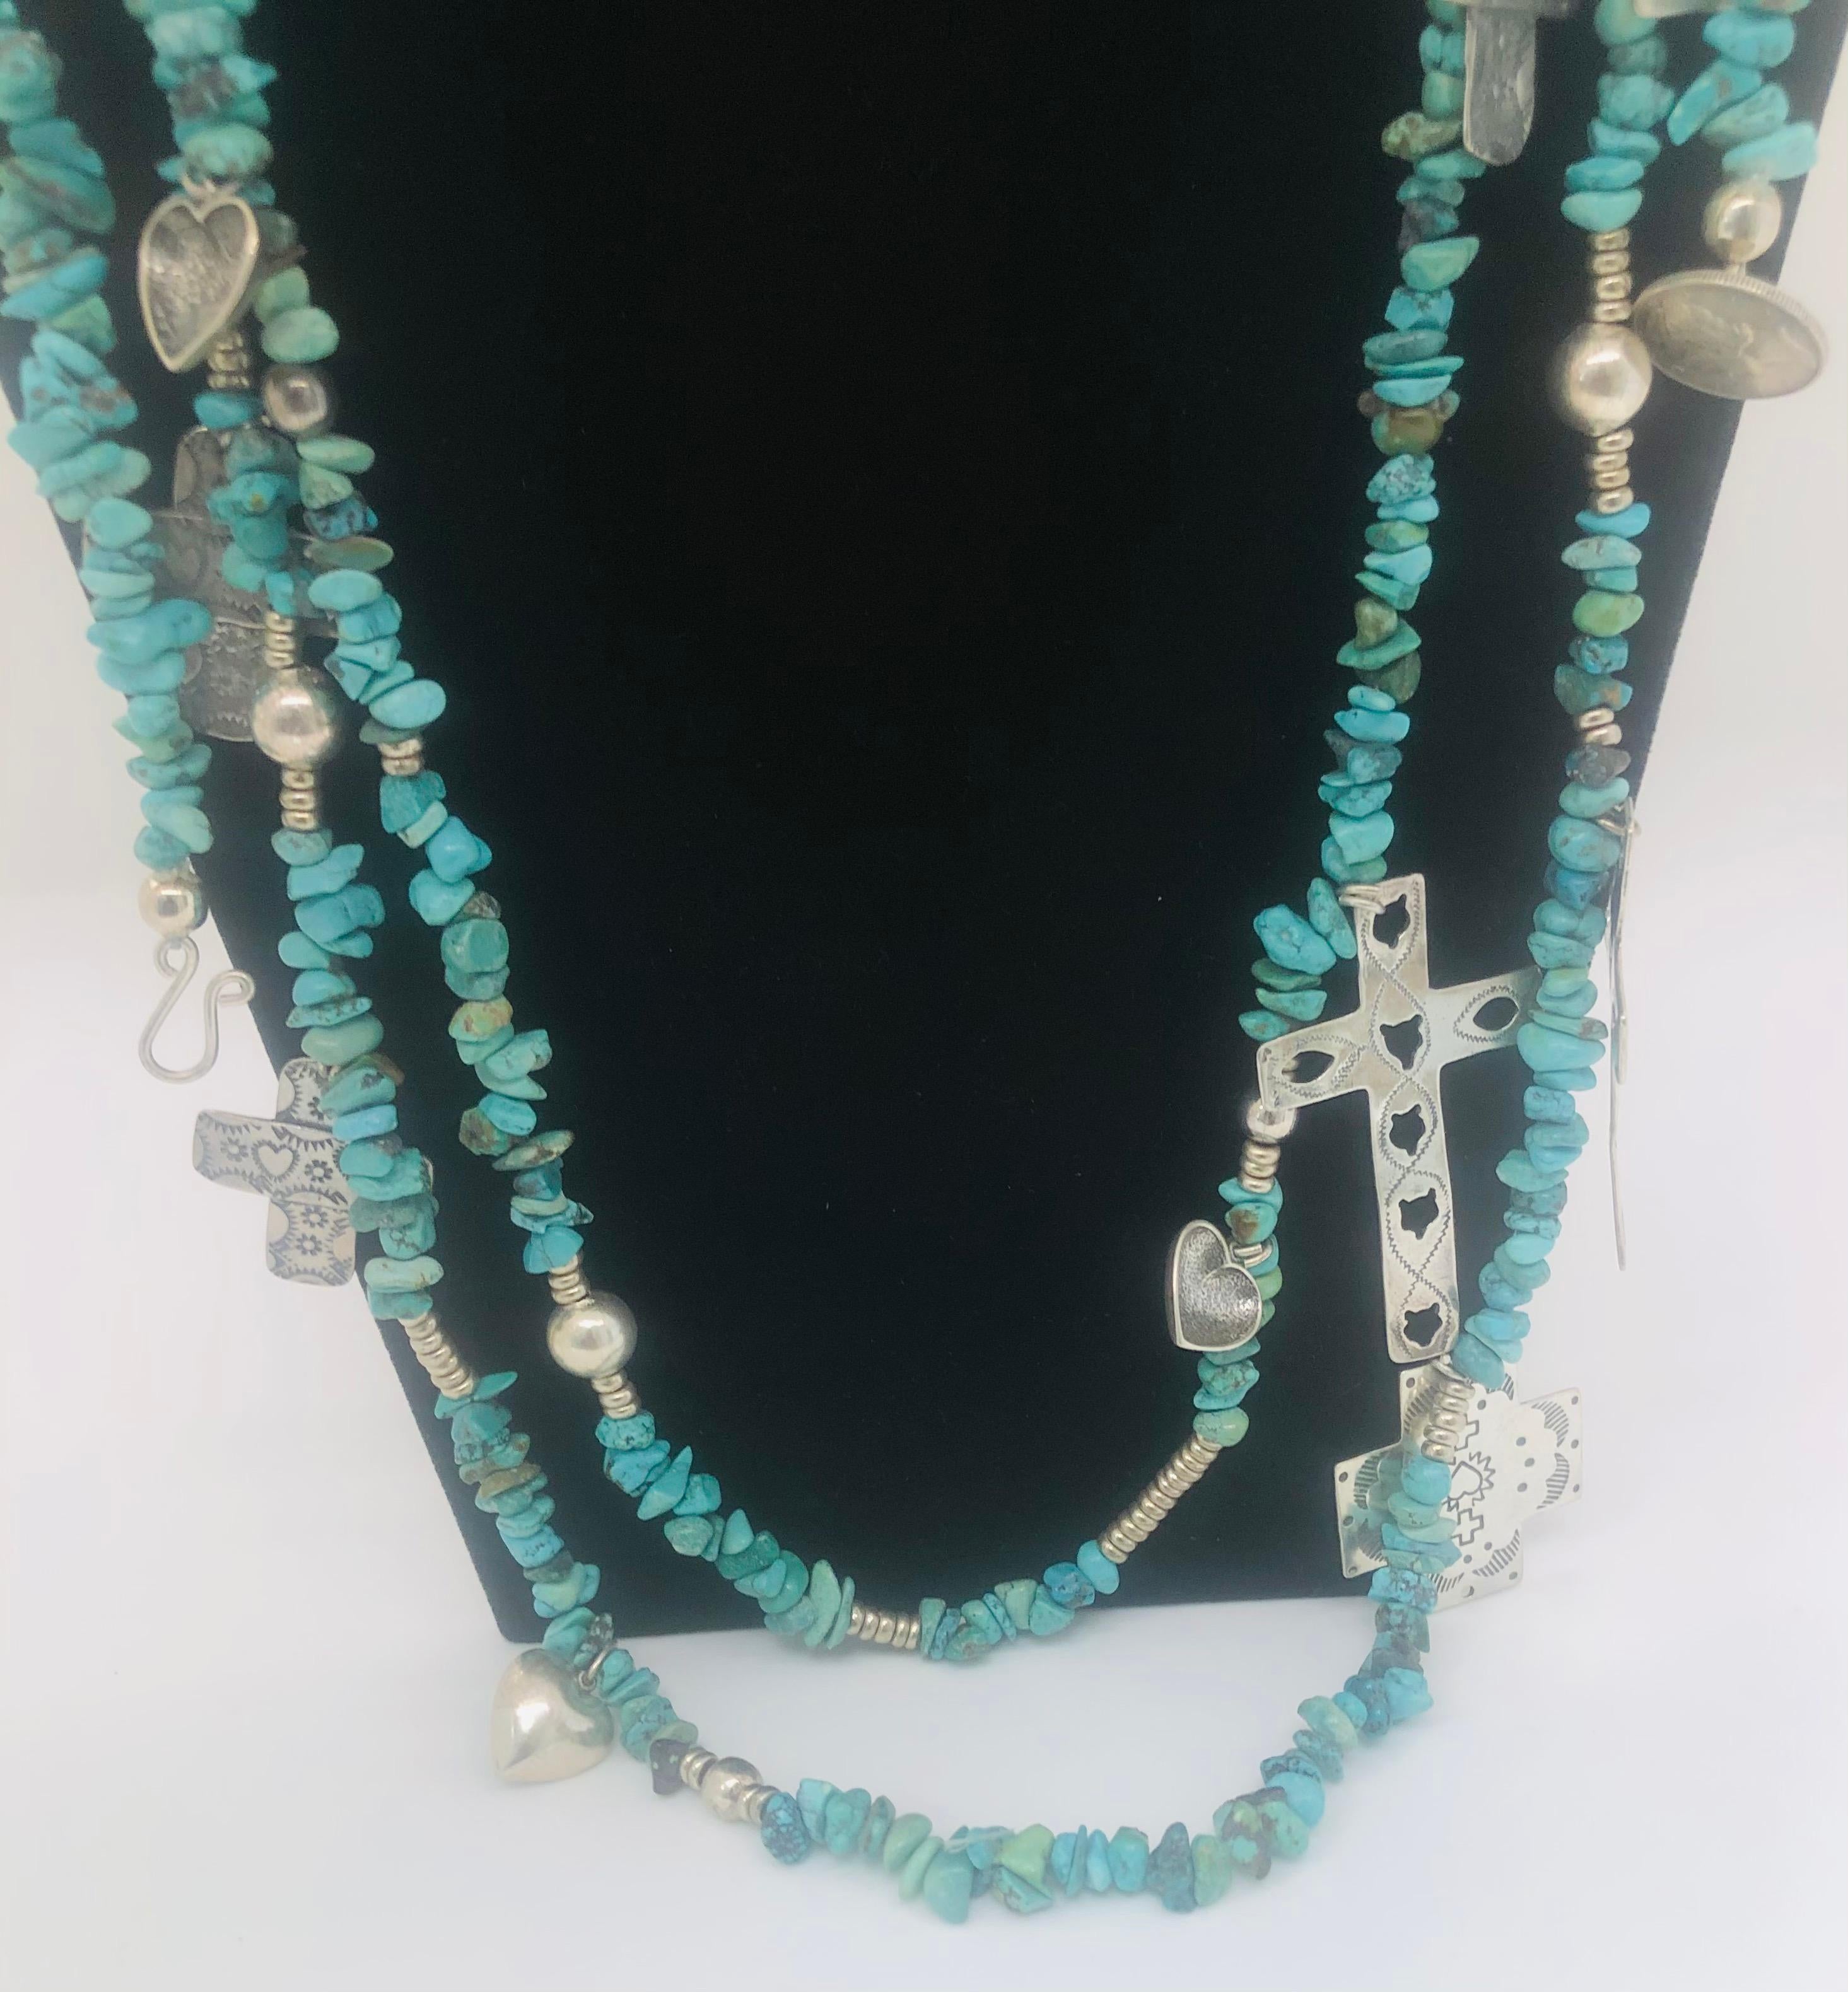 A rare T Foree necklace with antique sterling silver cross pendants & Navajo turquoise. The statement necklace is engraved and marked T Foree sterling 0.925 on the pendants. The pendants vary in size, design and shape. 

Maker/ Artist: T Foree